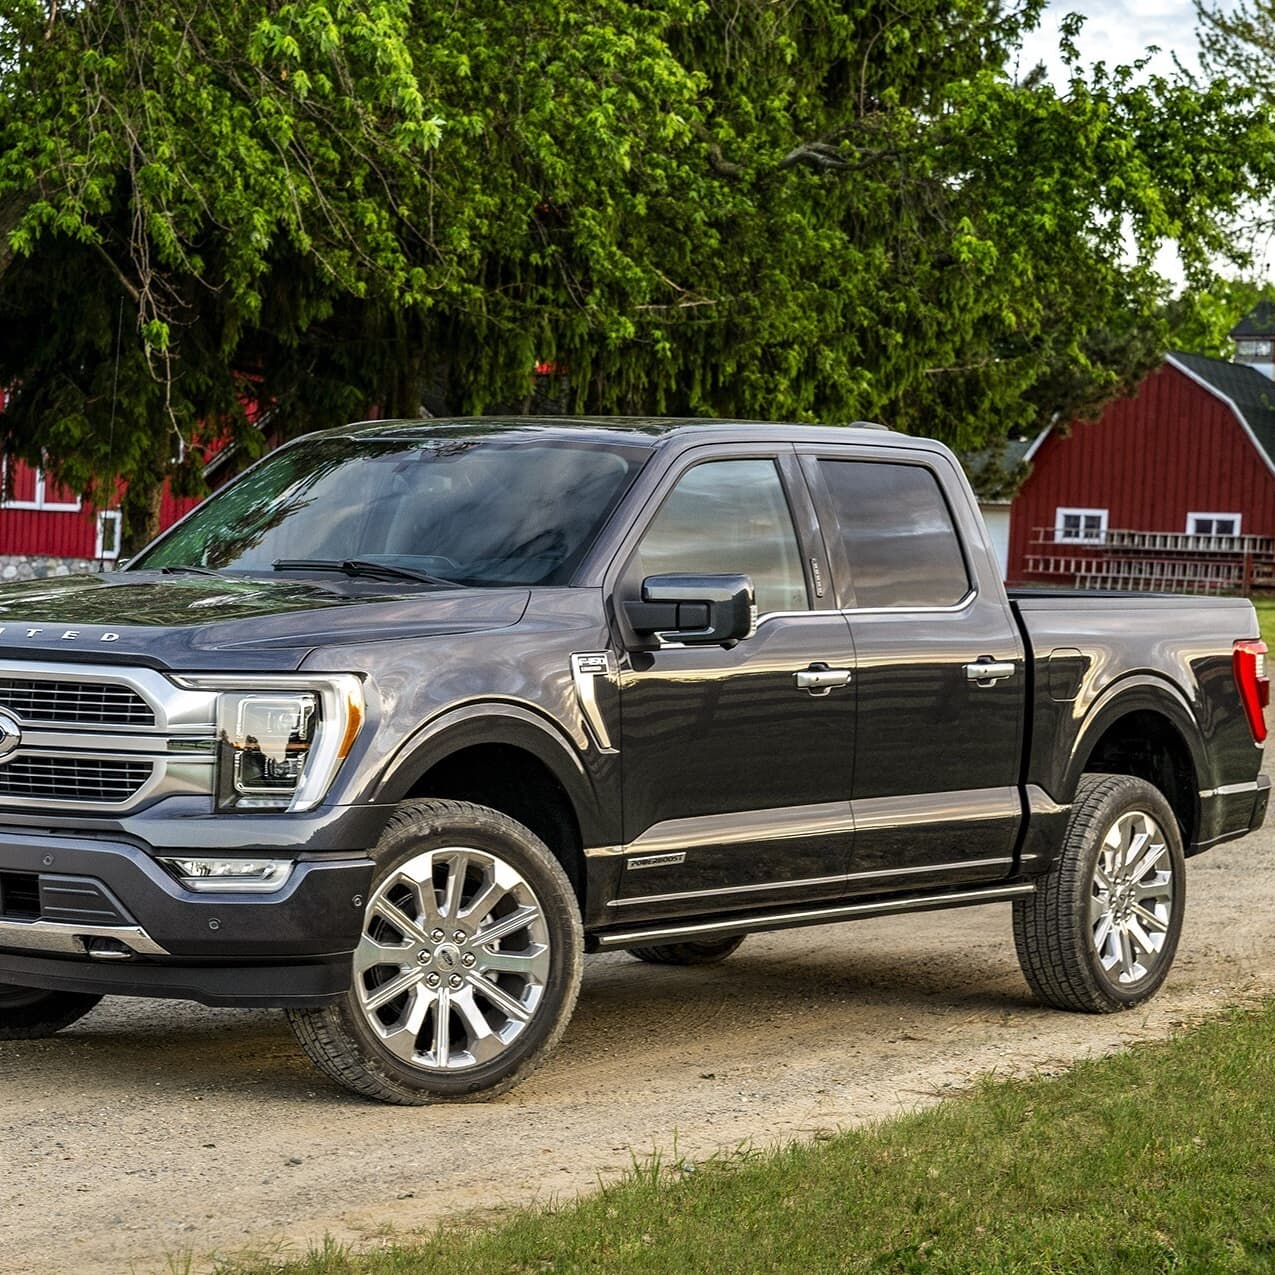 This Is The Full Size Pickup That Costs The Least Over 5 Years Marketwatch